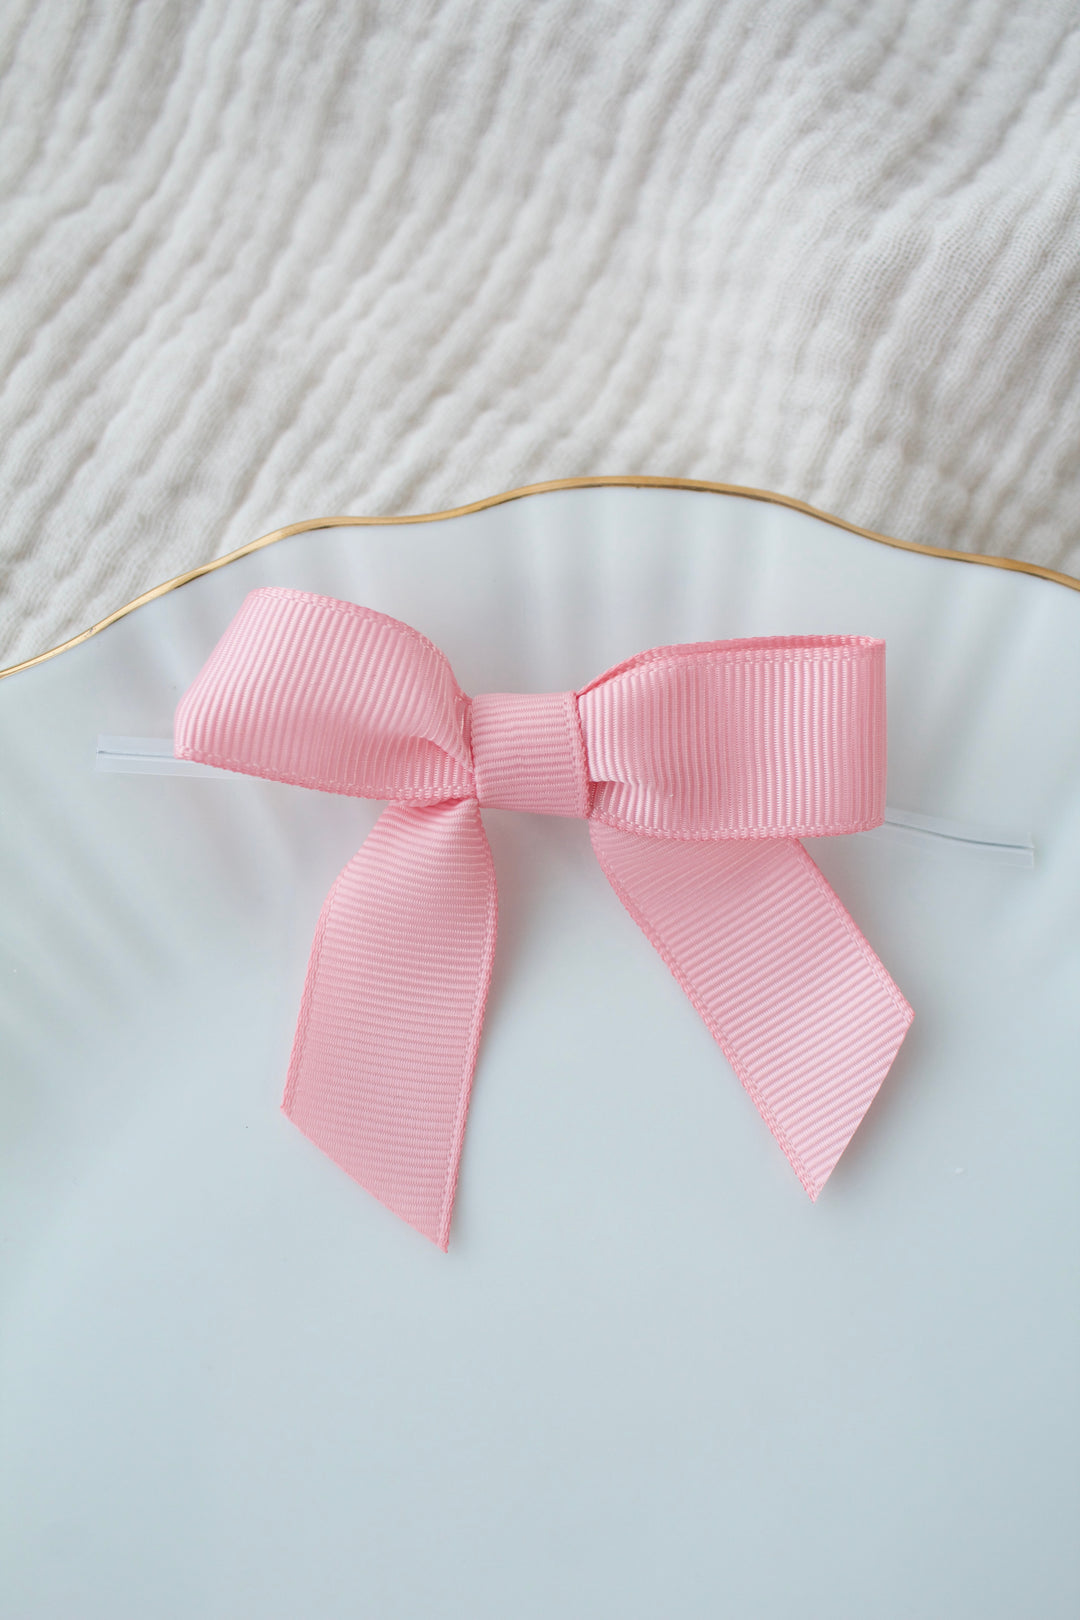 Pink - Grosgrains pre-tied bows (20pcs) with clear twist tie